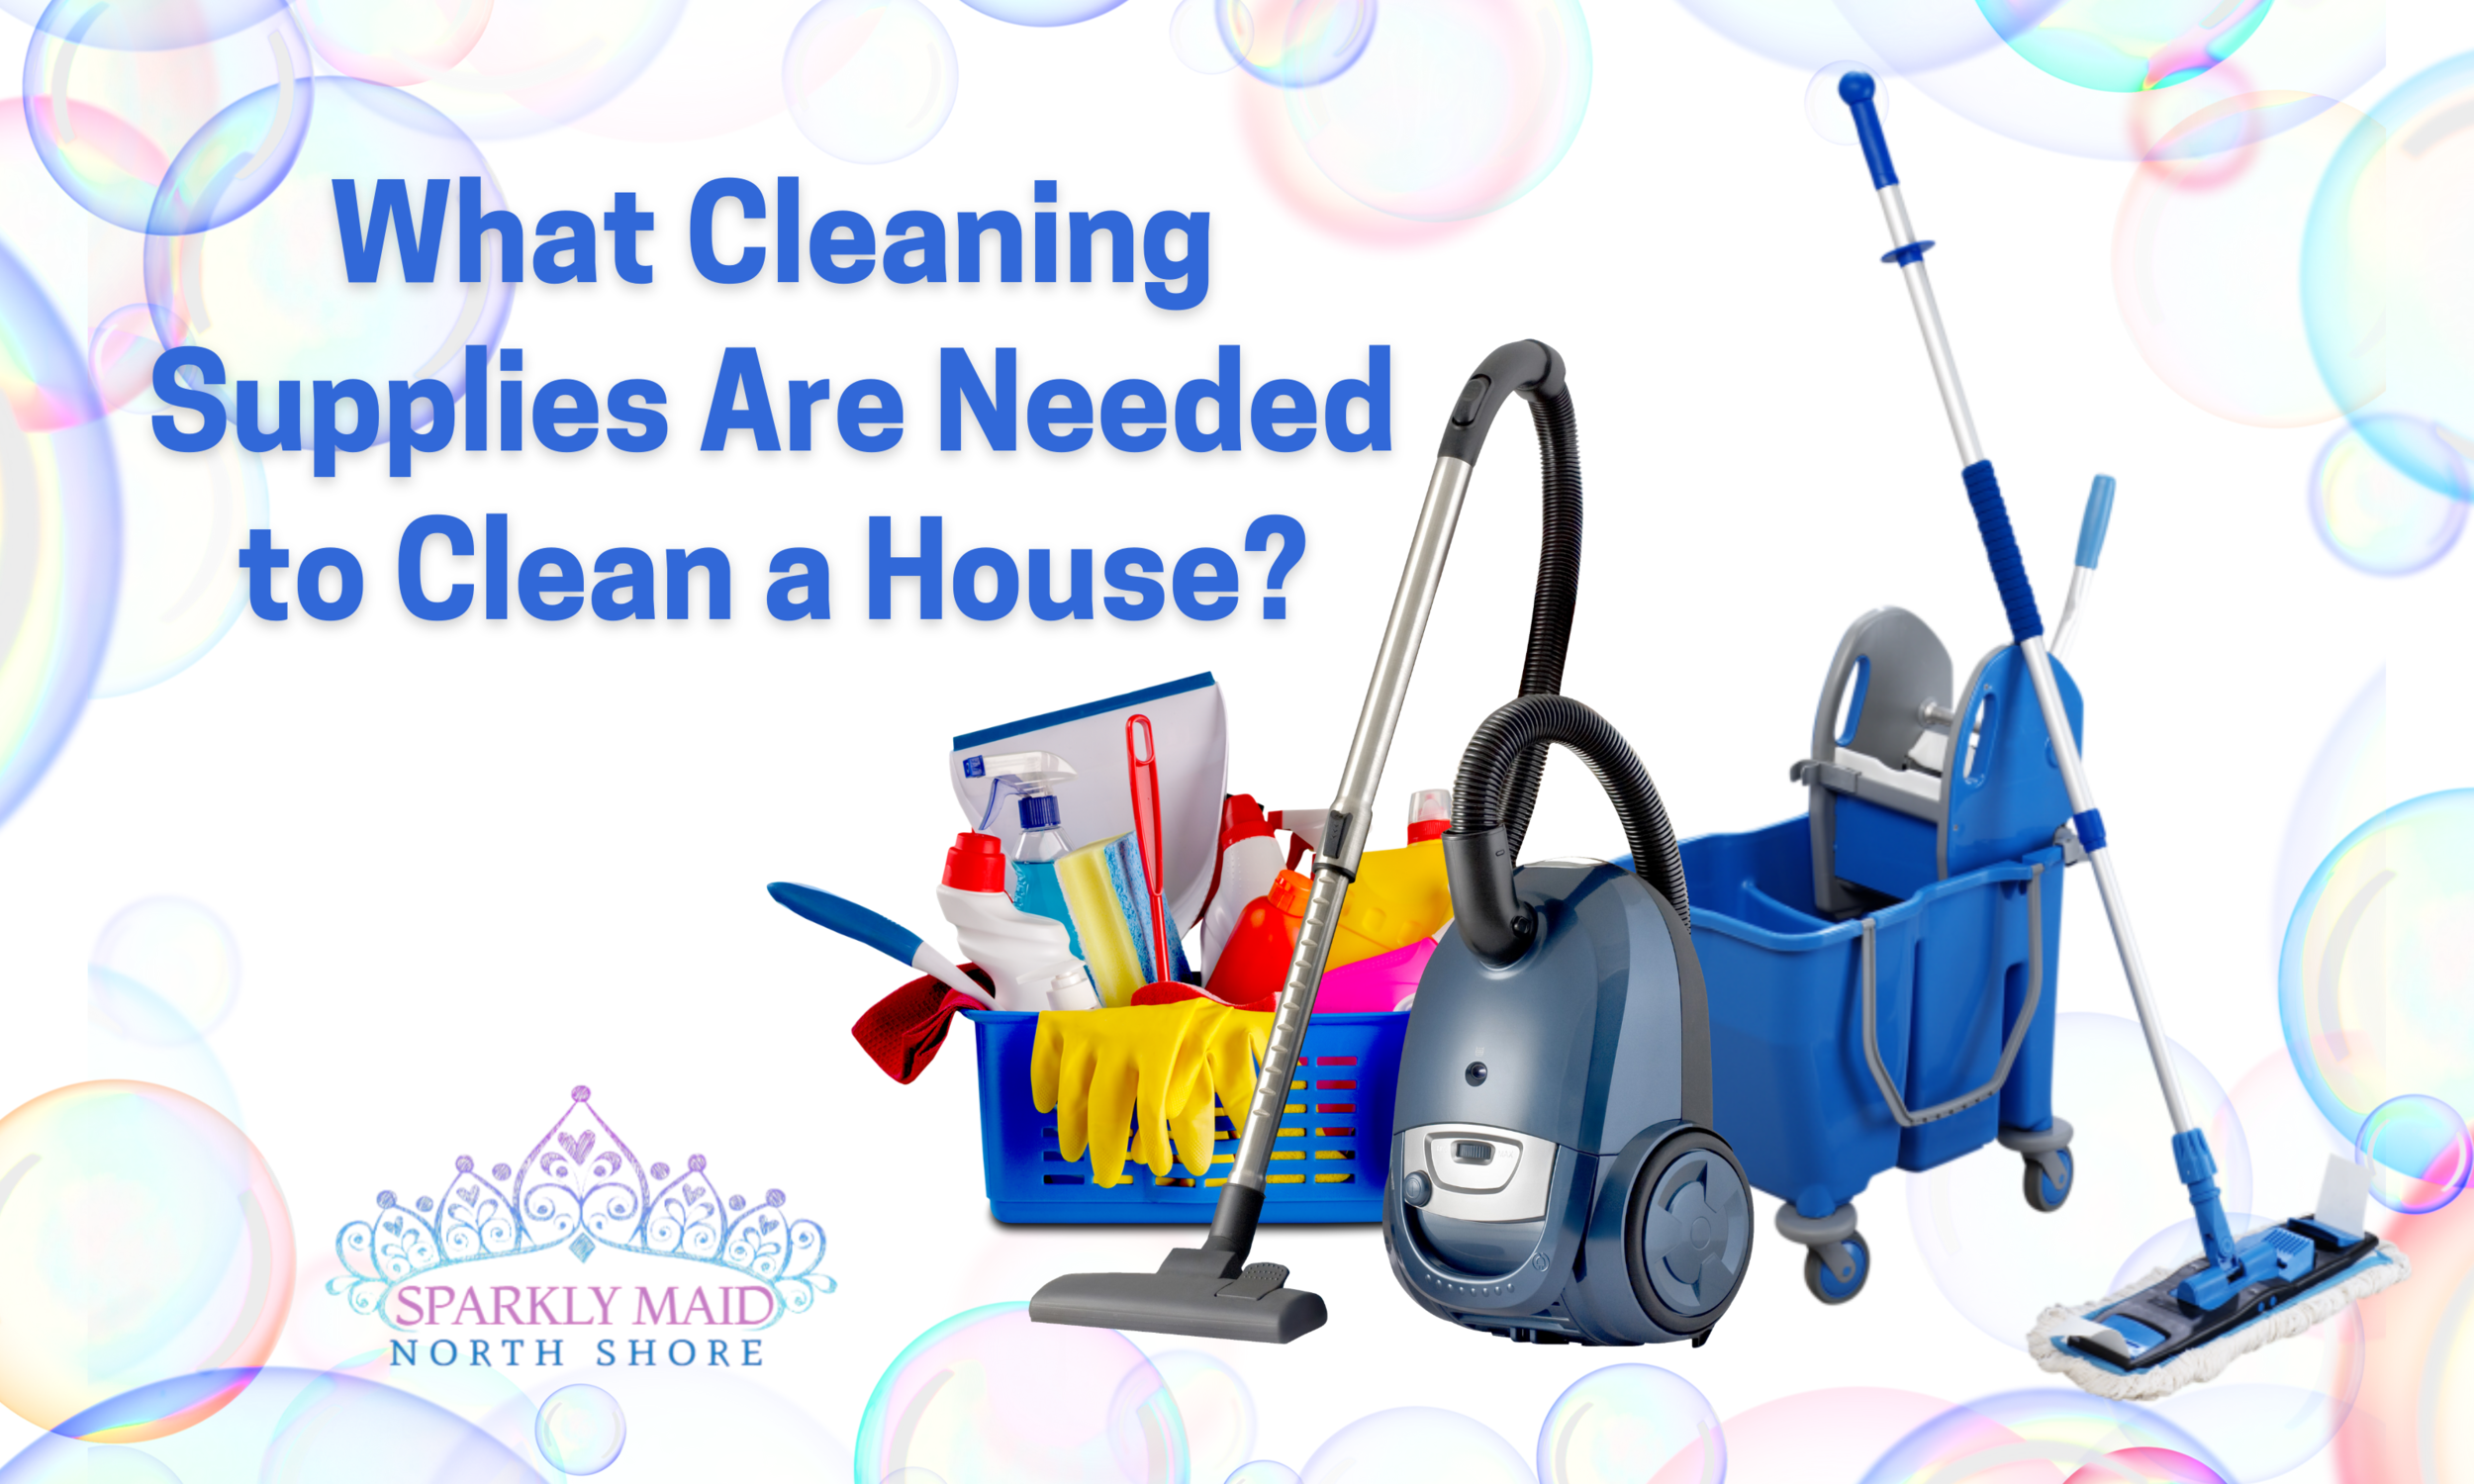 https://images.squarespace-cdn.com/content/v1/5cb89b220cf57d6533d827e4/1603459437127-WW8XP3JNBGP7MOOZAR69/What+Cleaning+Supplies+Are+Needed+to+Clean+a+House.png